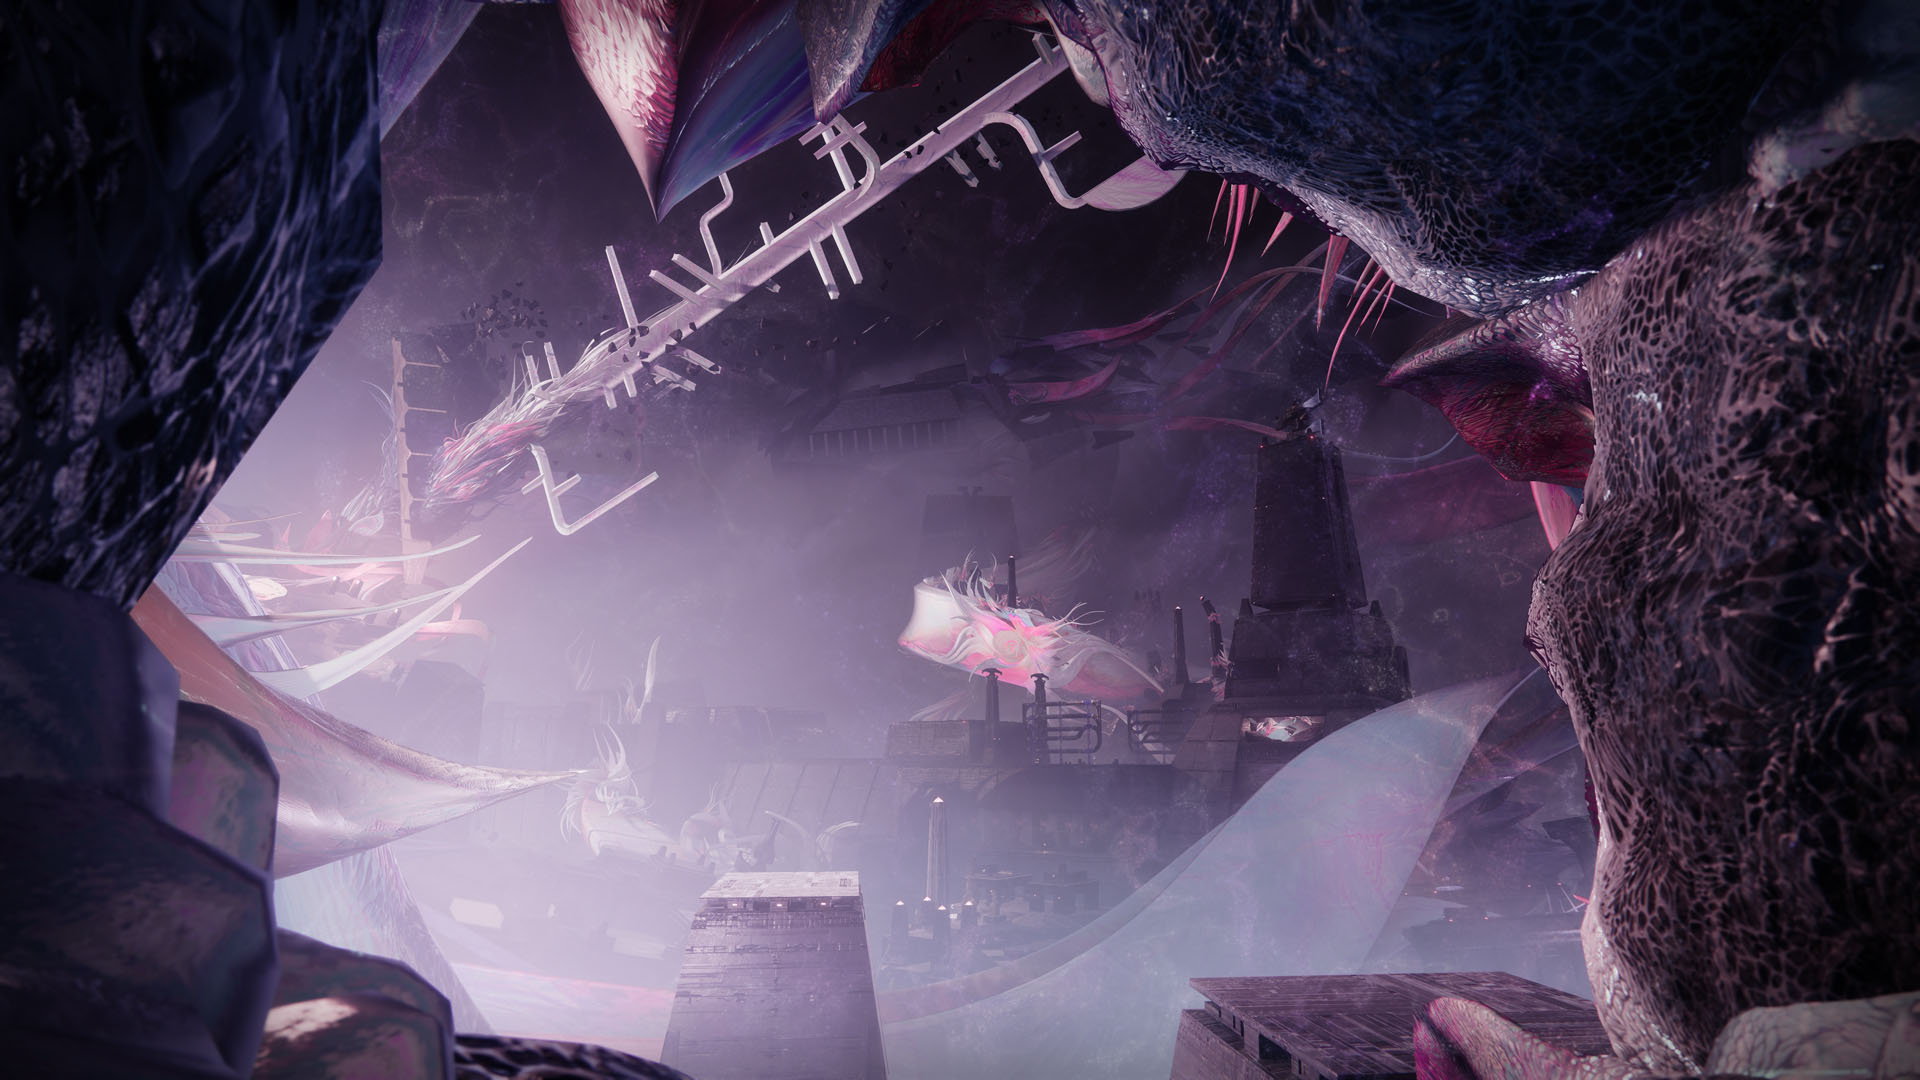 Destiny 2 Confirms Jump Pads In Root of Nightmares Raid Are Tied To In-Game FPS